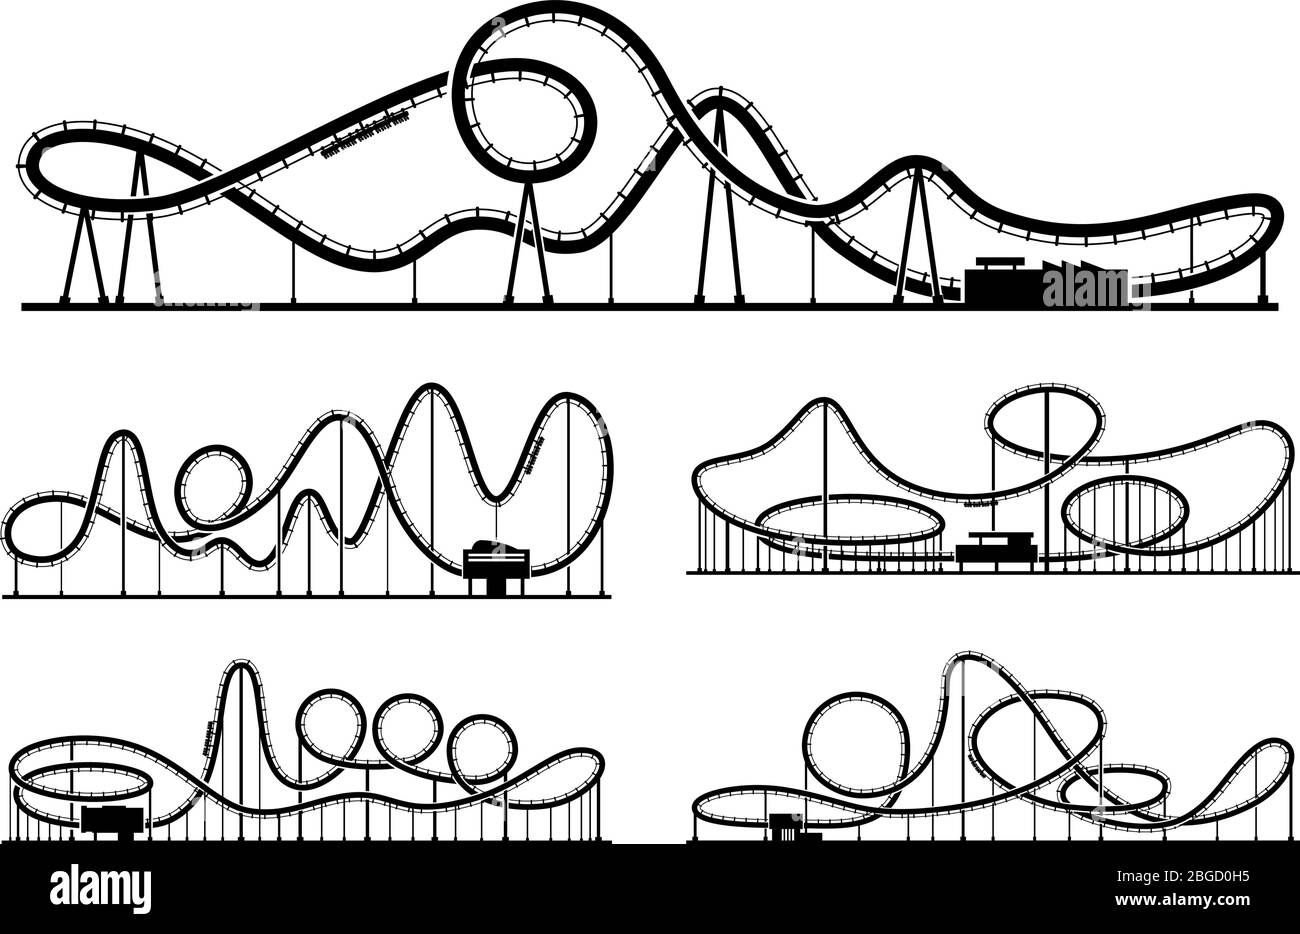 Rollercoaster vector silhouettes isolate on white background. Amusement park illustration Stock Vector